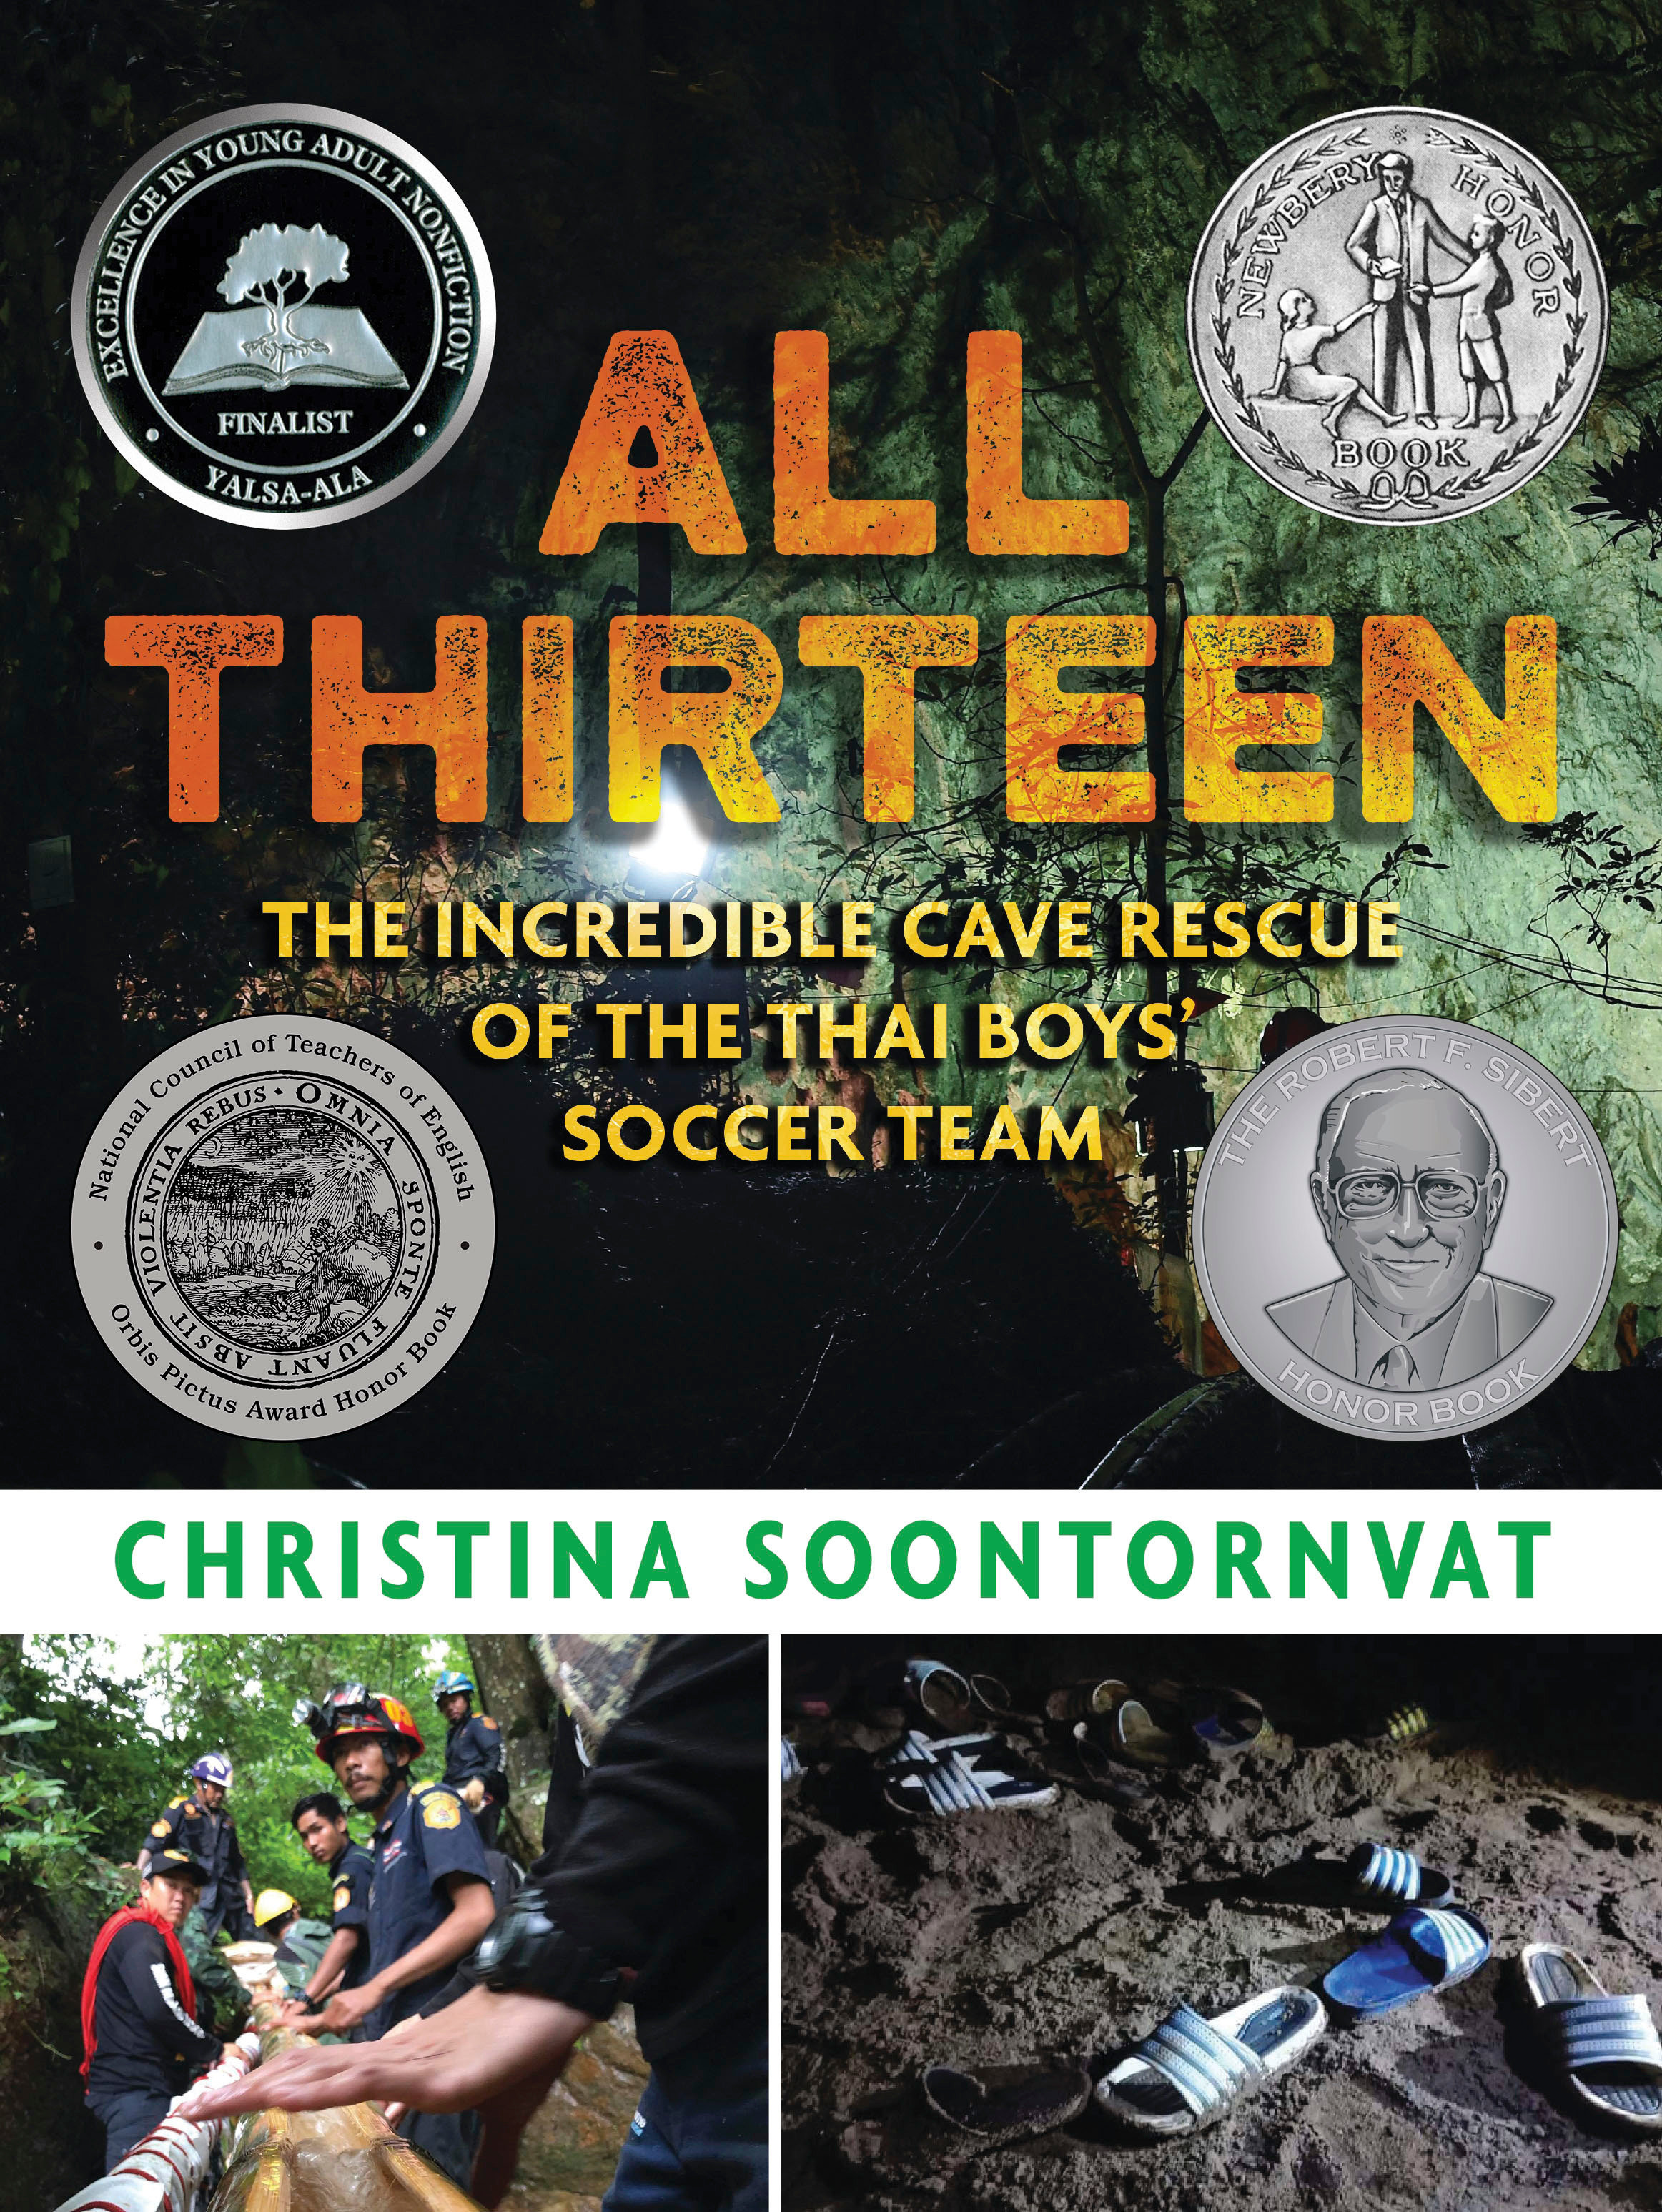 All Thirteen: The Incredible Cave Rescue Of The Thai Boys' Soccer Team (Hardcover Book)